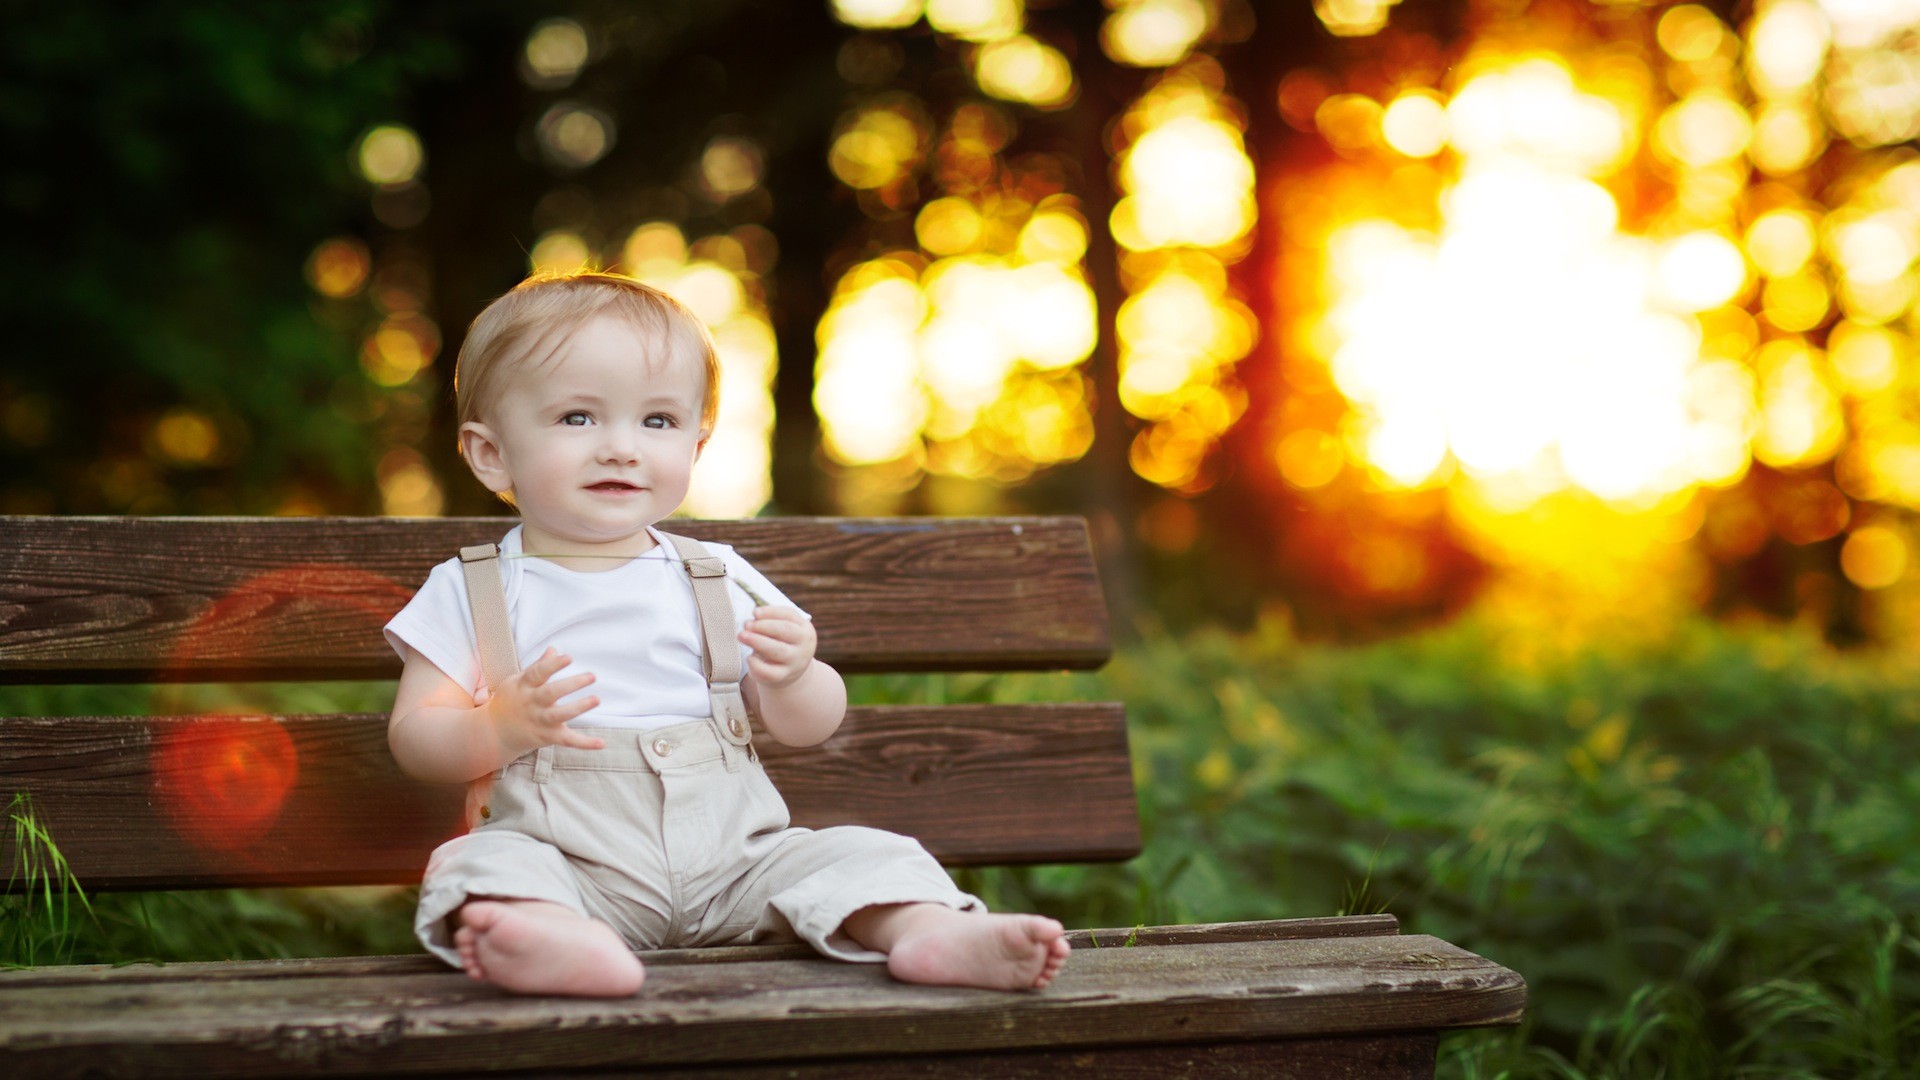 Small And Cute Baby Wallpaper Download - Small Cute Boy Baby Photos  Download - 1920x1080 Wallpaper 